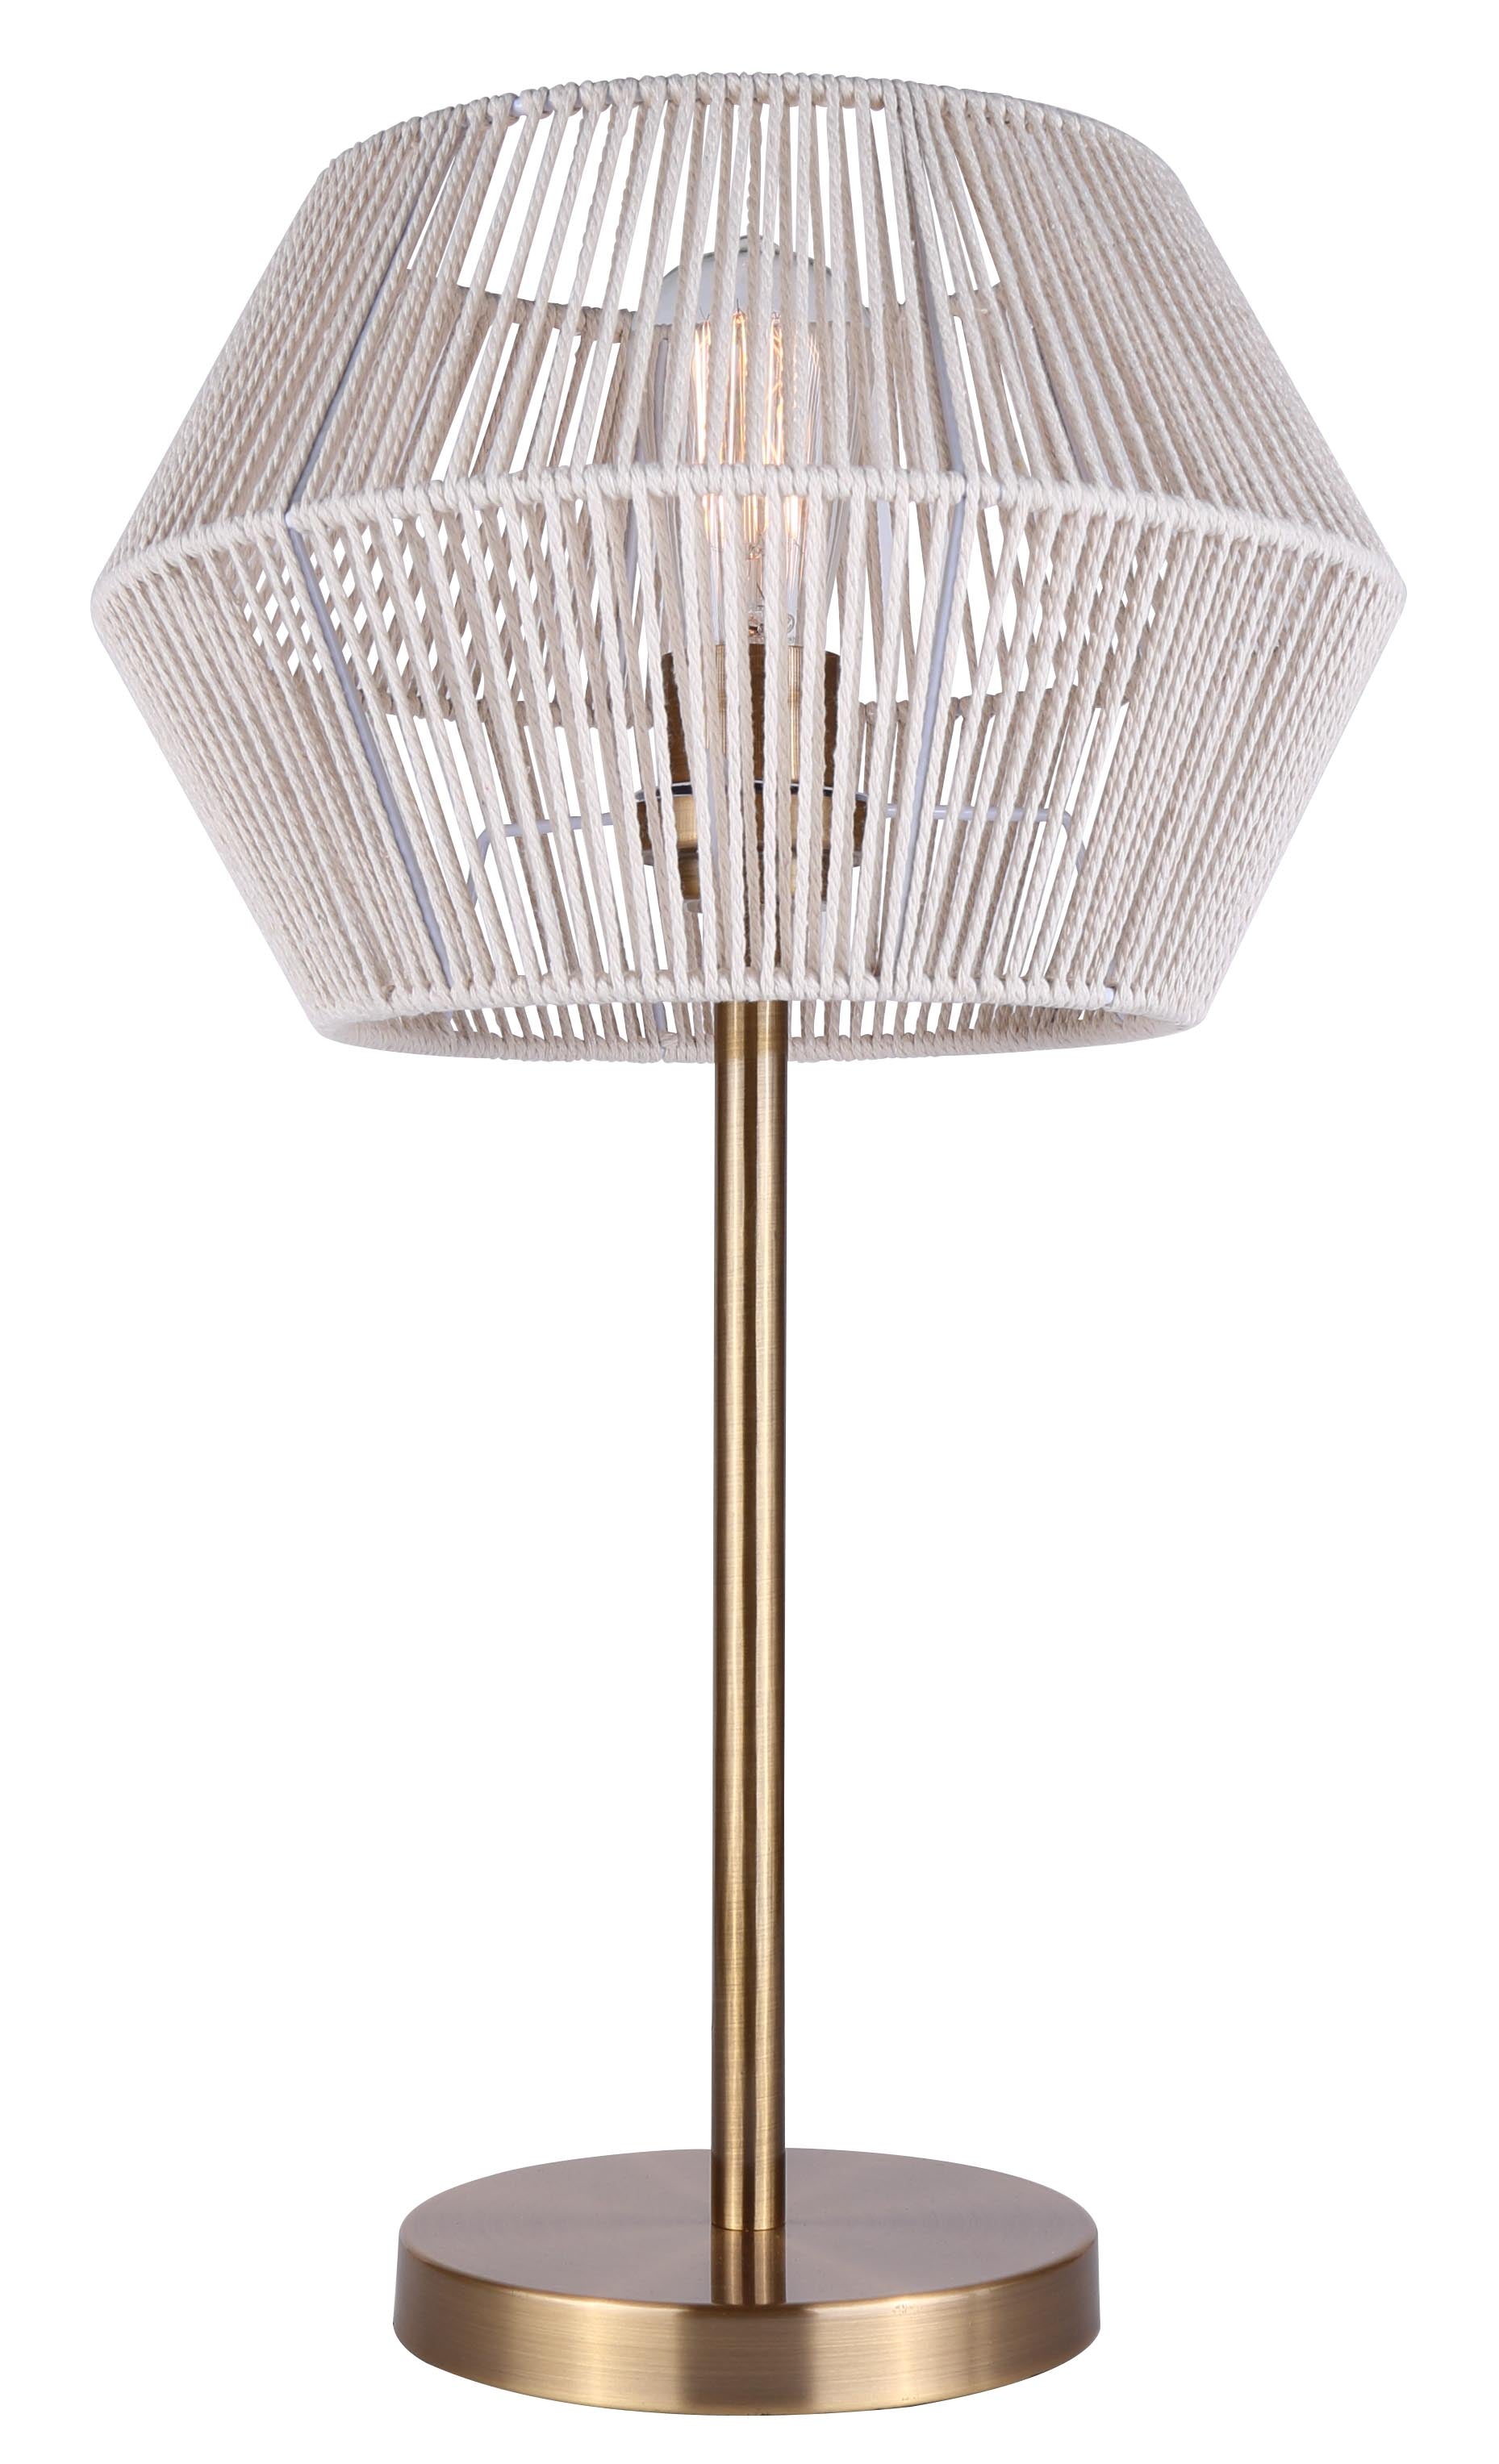 WILLOW Table lamp Gold INTEGRATED LED - ITL1120A22GD | CANARM